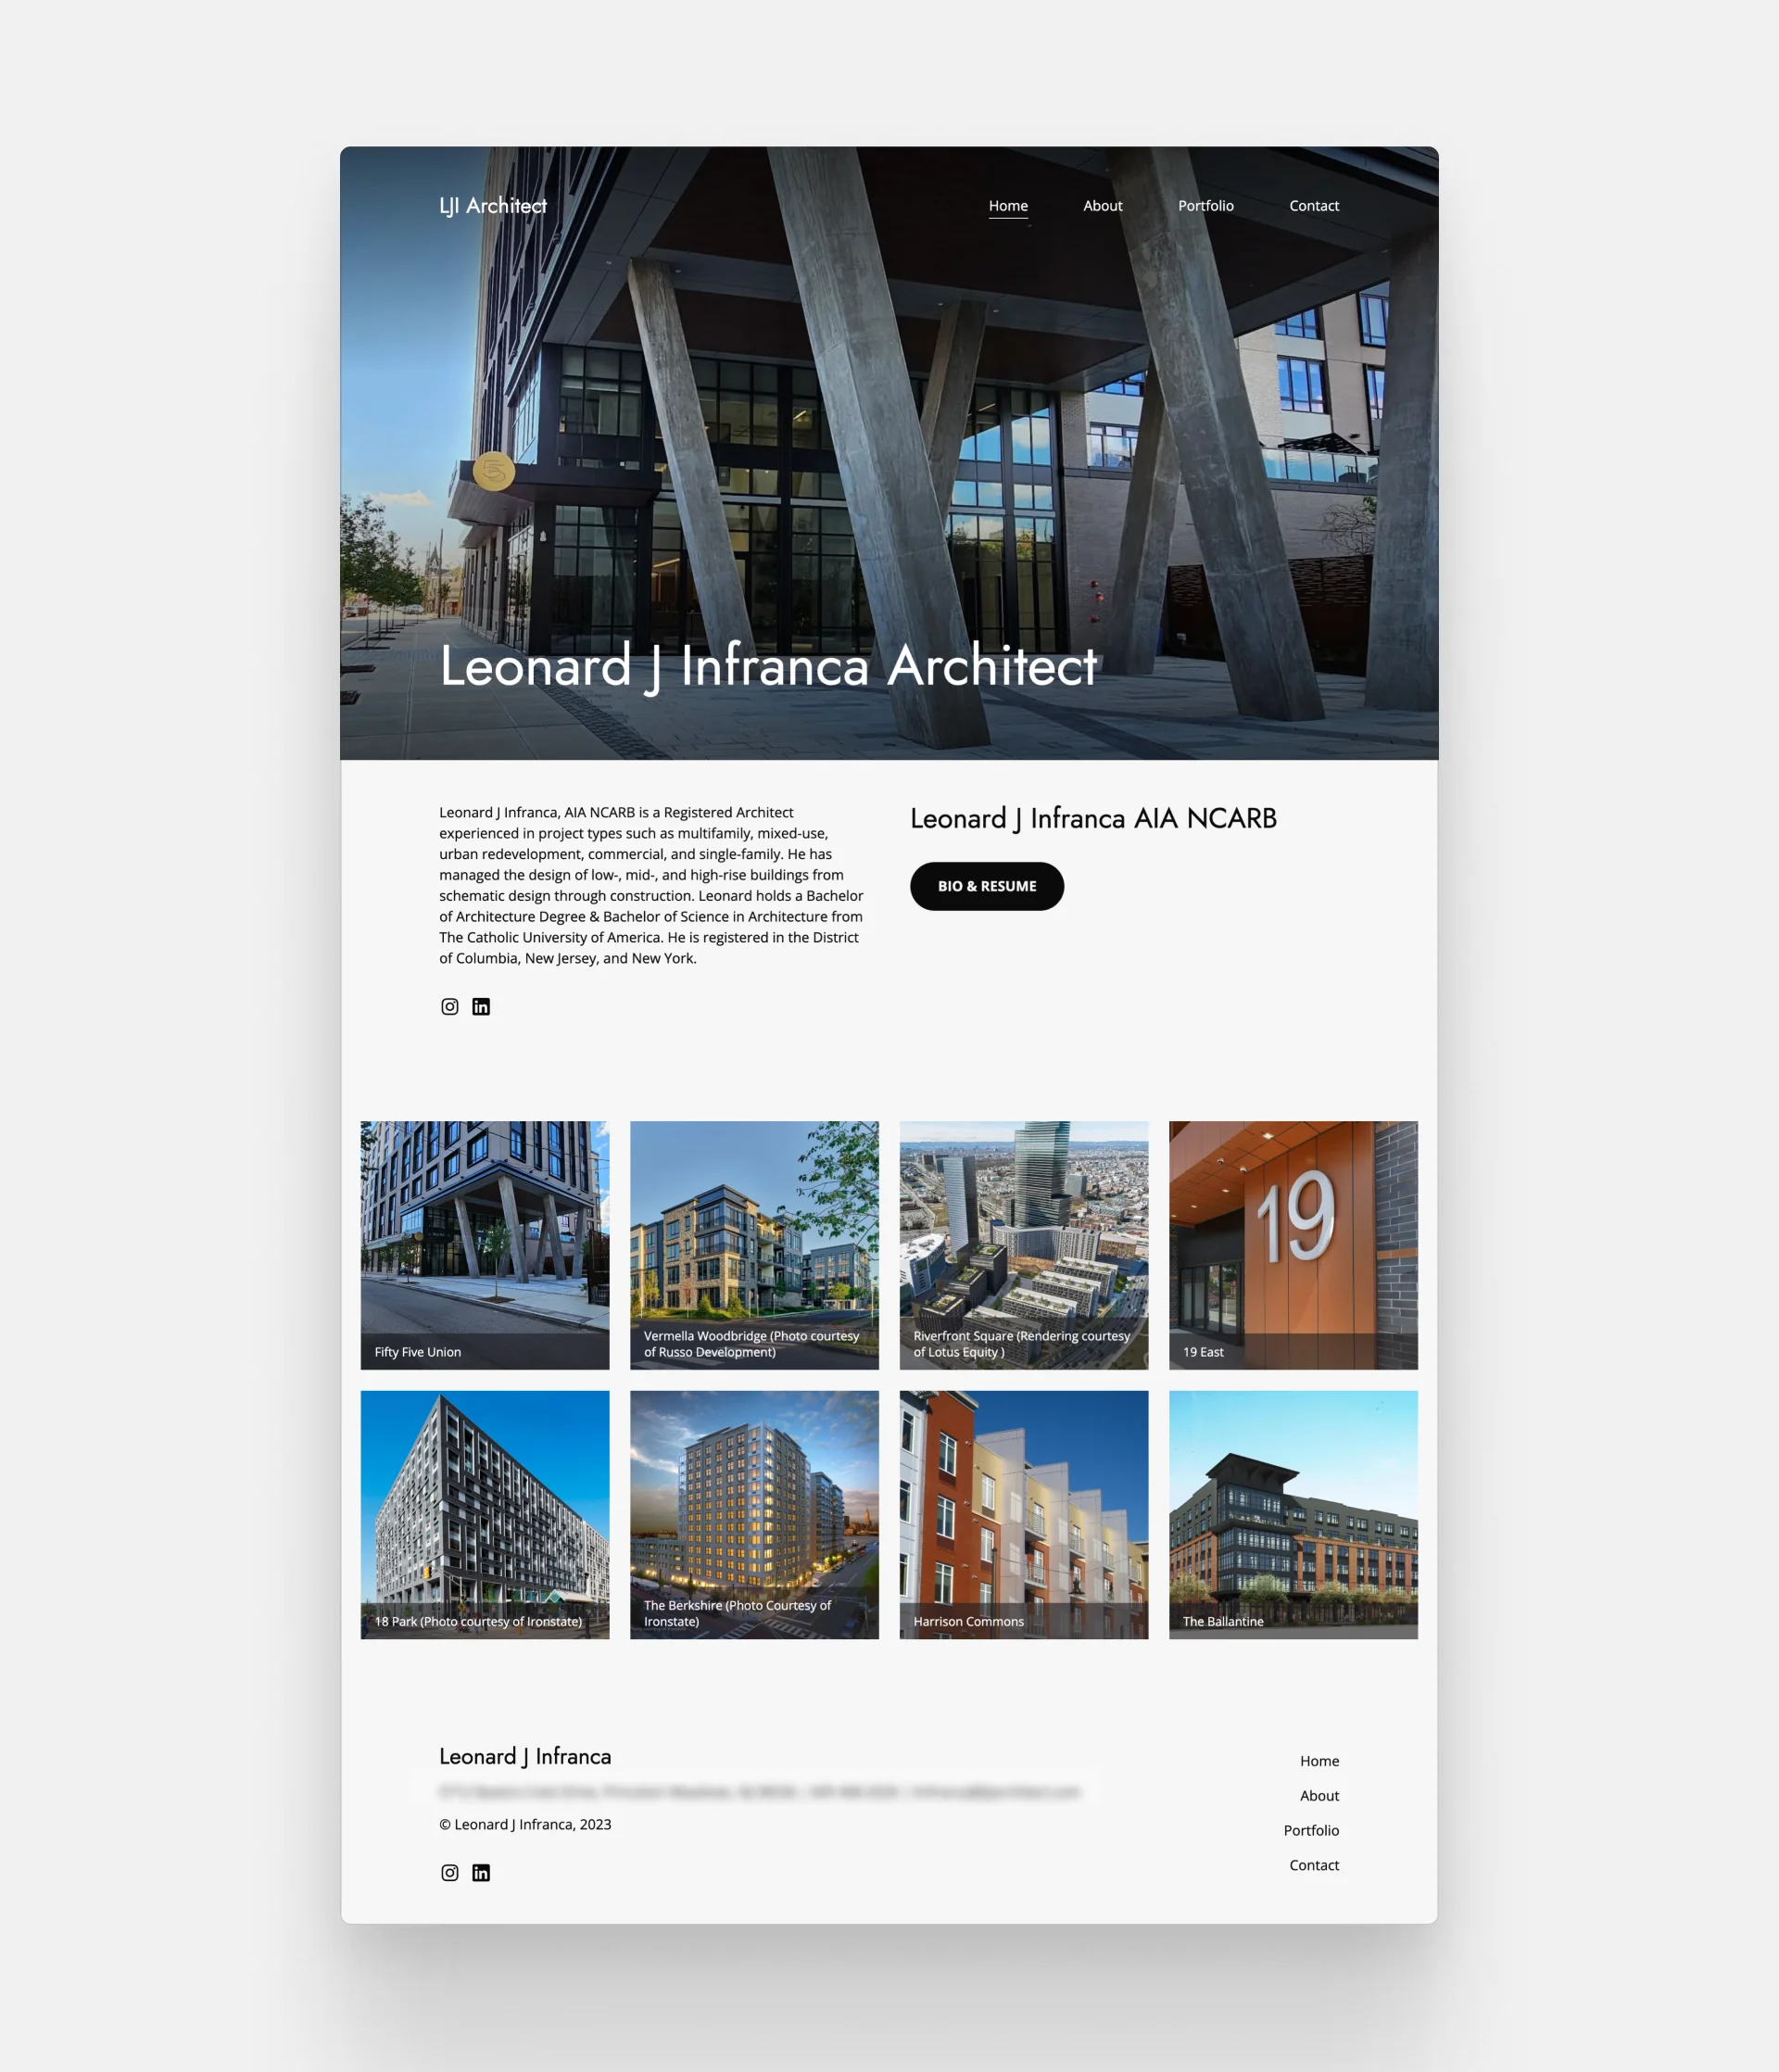 Screenshot of Leonard J Infranca's architecture portfolio. It starts with a large cover image of one of his skyscraper projects, and then, after a short introduction, he dives into his projects. He showcased 8 of his best projects with impressive thumbnails.